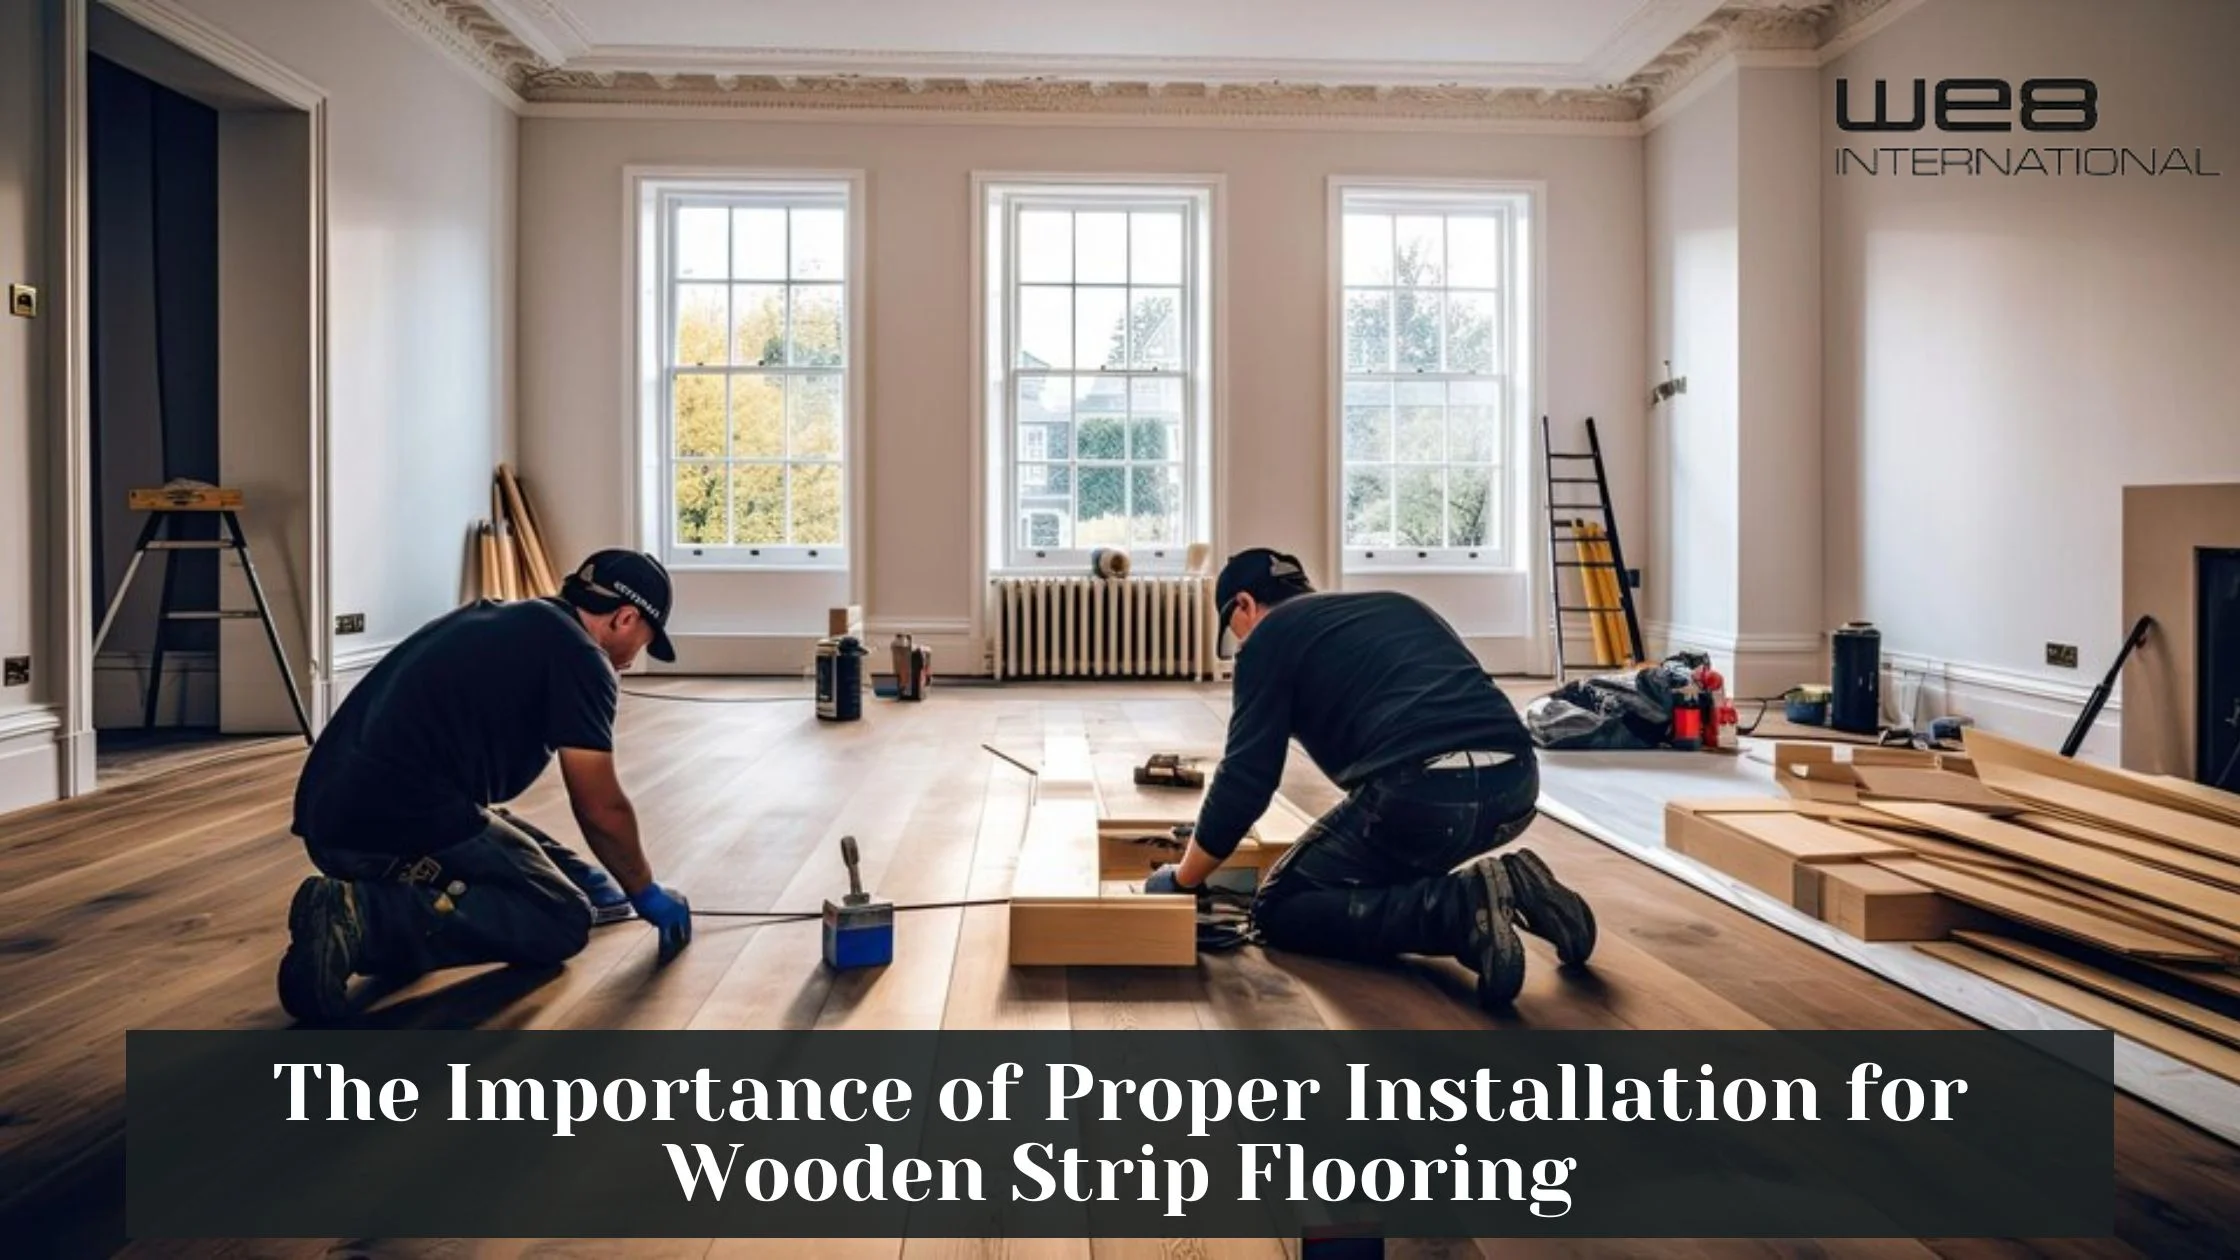 The Importance of Proper Installation for Wooden Strip Flooring